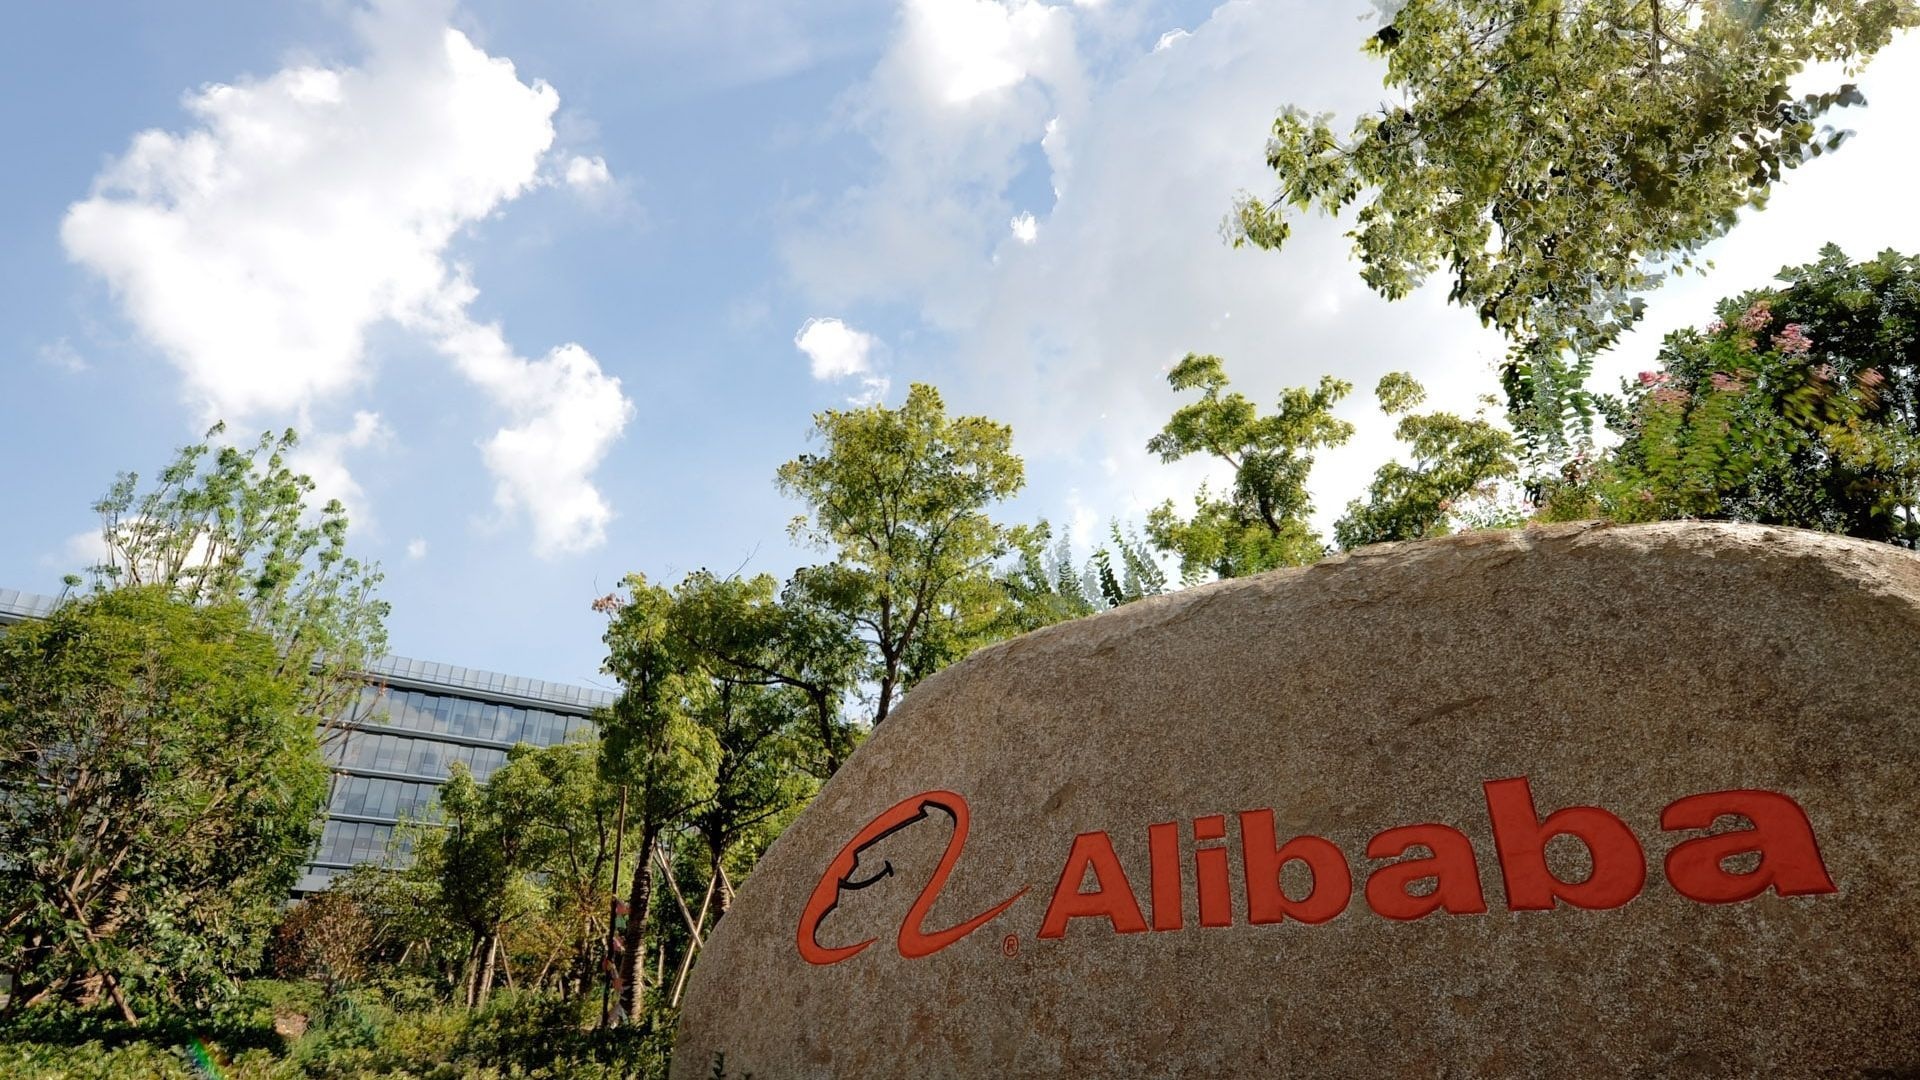 Alibaba Group: A Chinese multinational Internet, and technology company founded on 28 June 1999. 1920x1080 Full HD Background.